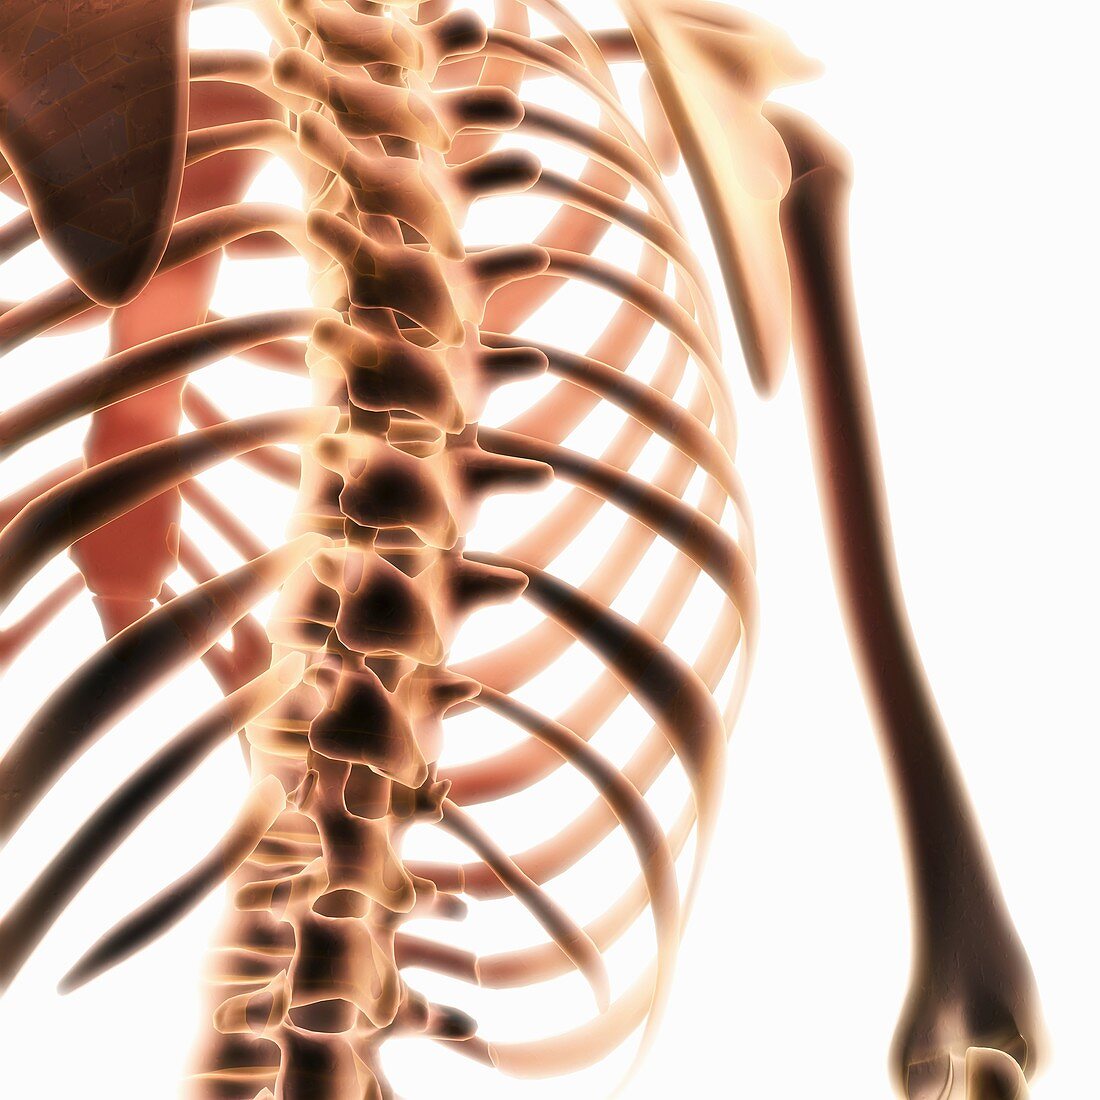 The Spine and Rib Cage, artwork